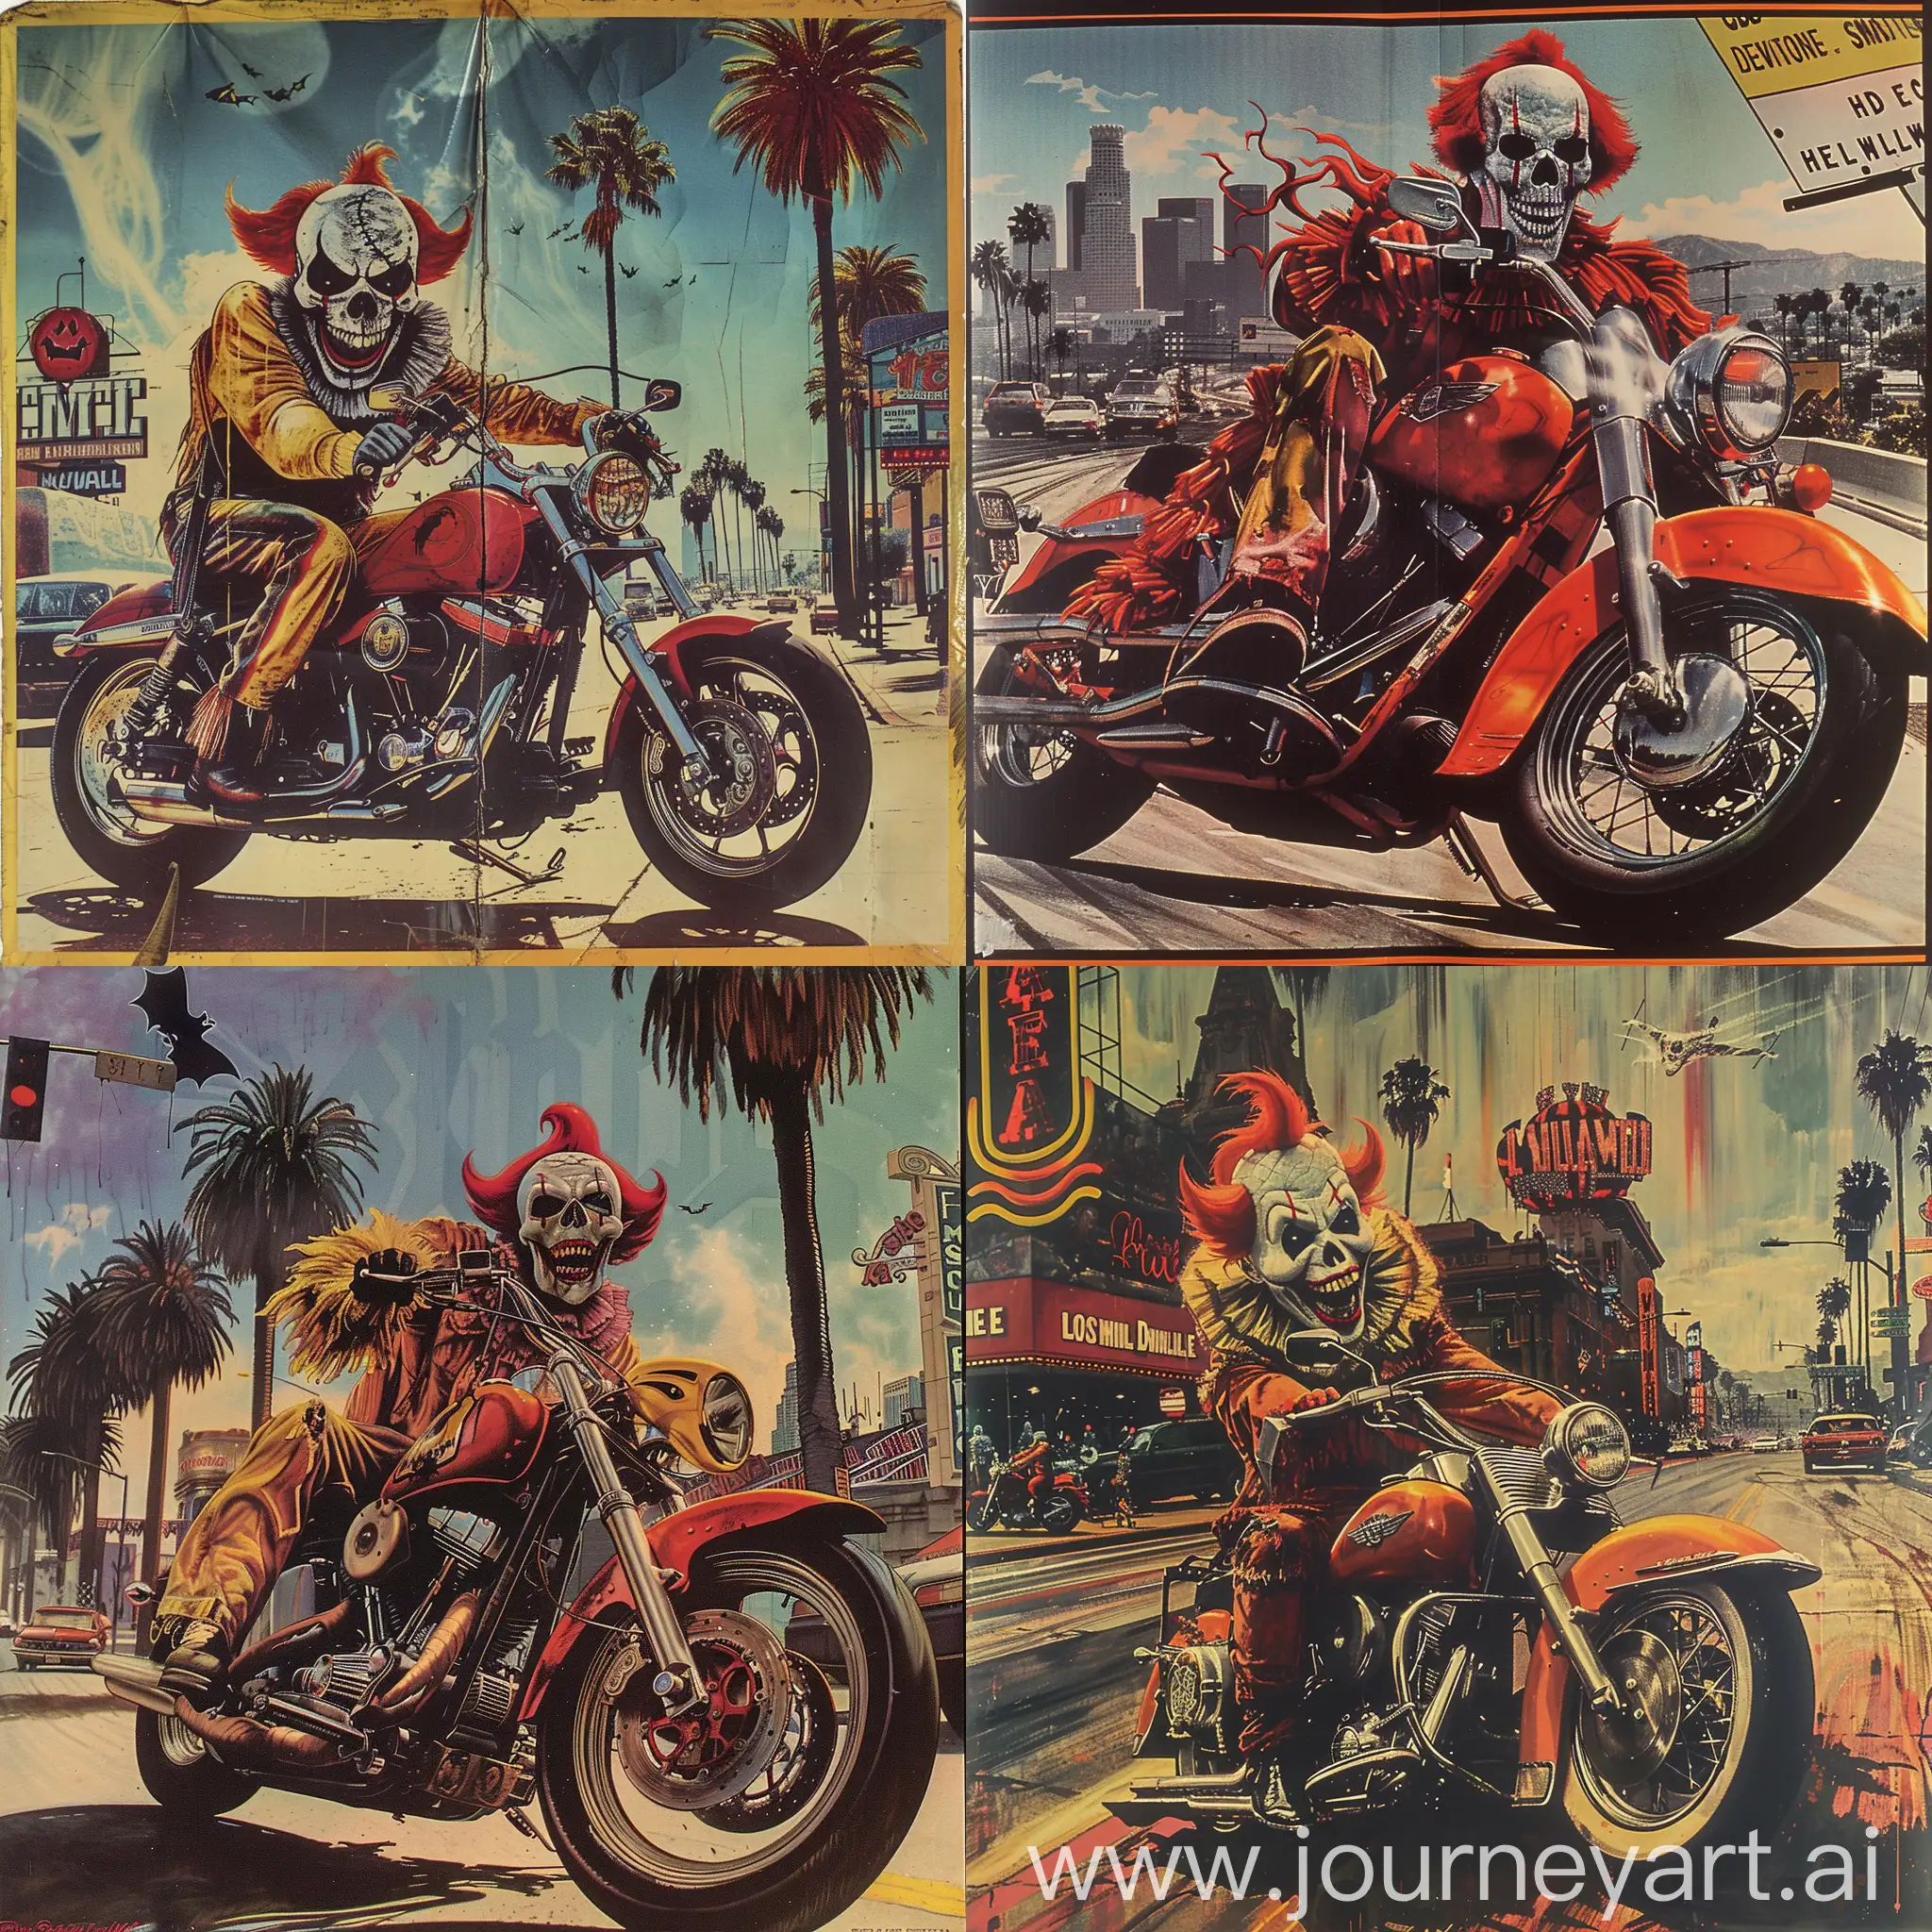 An 80s glam metal halloween album cover featuring a skull-faced clown on a Harley Davidsons in Los Angeles Hollywood with serial killer slasher